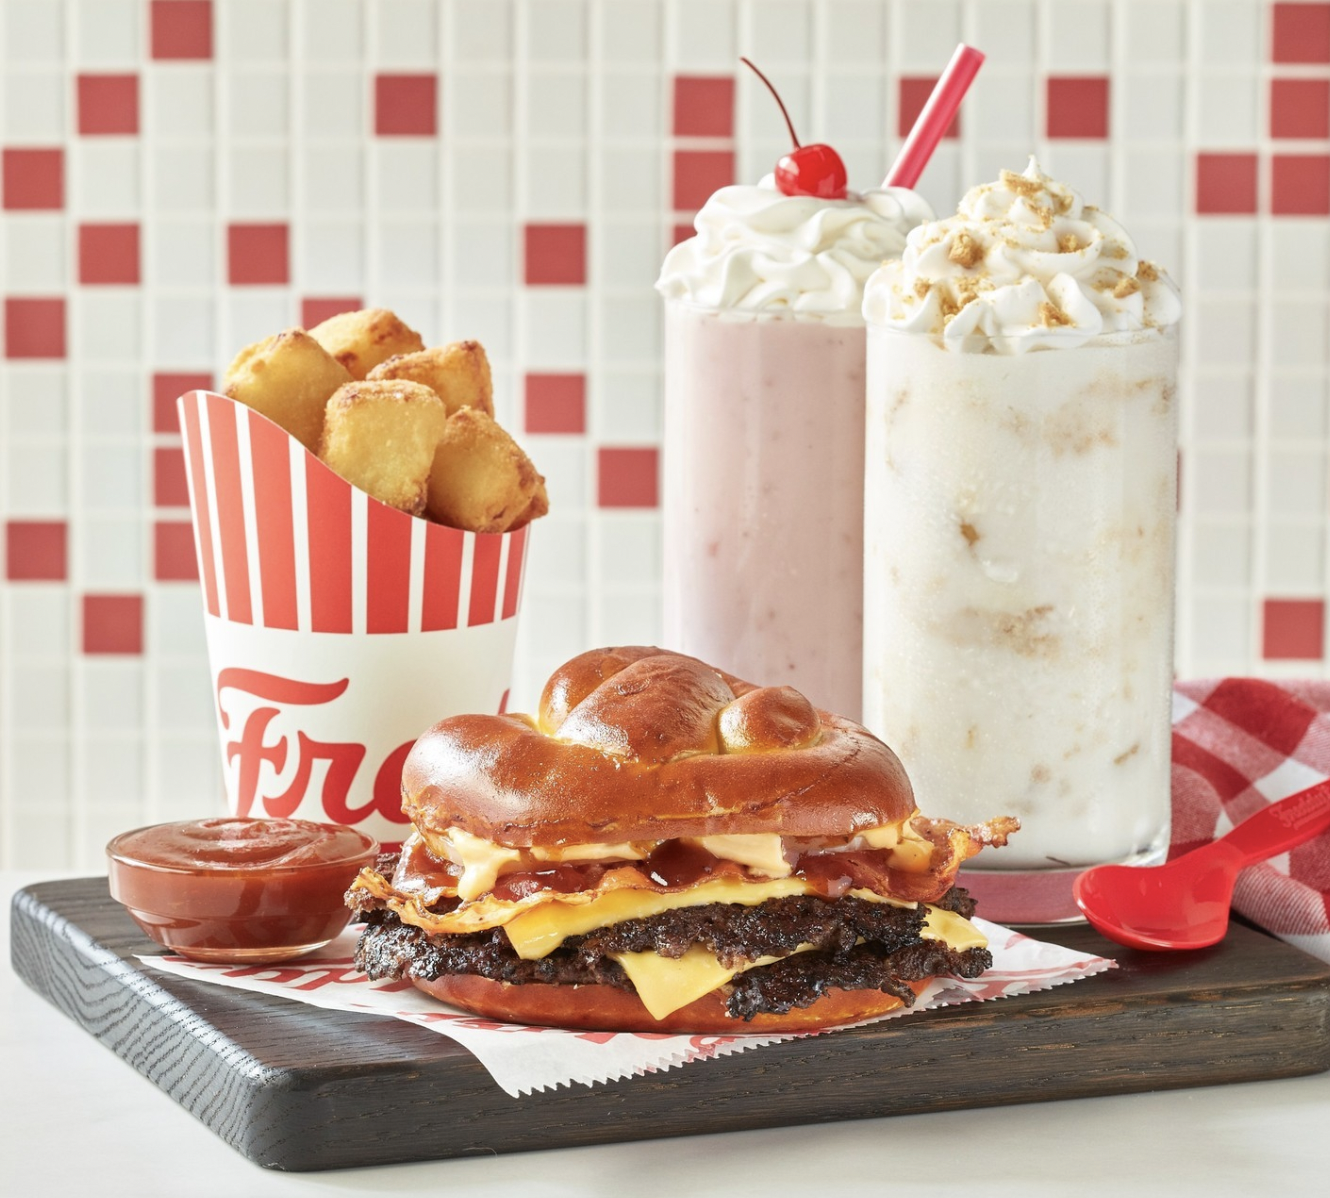 Freddy's Frozen Custard & Steakburgers on LinkedIn: Sales Climb for Largest  Burger Chains, Top 400 Data Shows